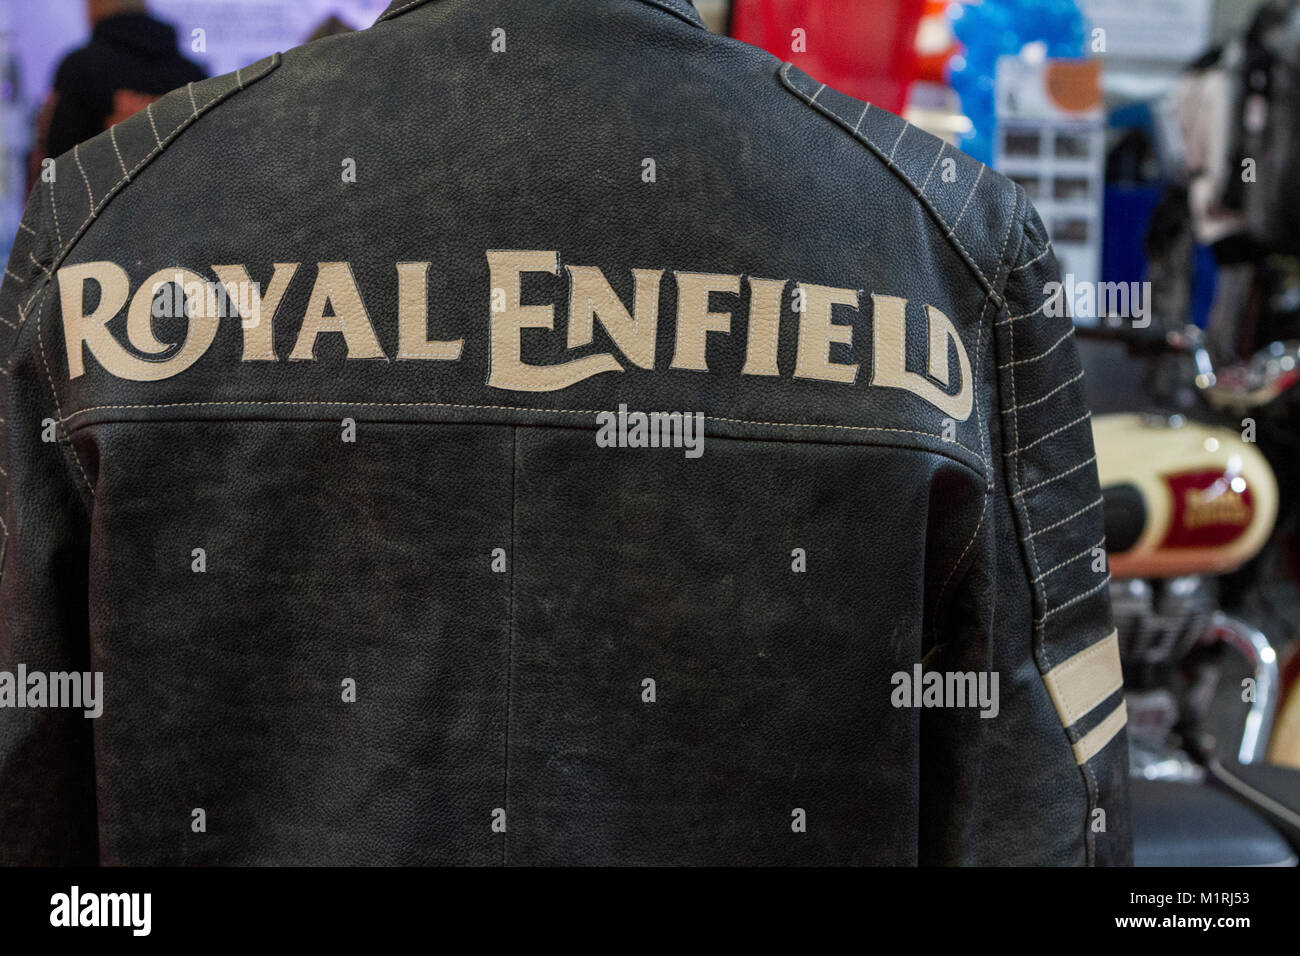 Torino, Italy. 1st Feb, 2018. Royal Enfield logo on a leather jacket Credit: Marco Destefanis/Alamy Live News Stock Photo